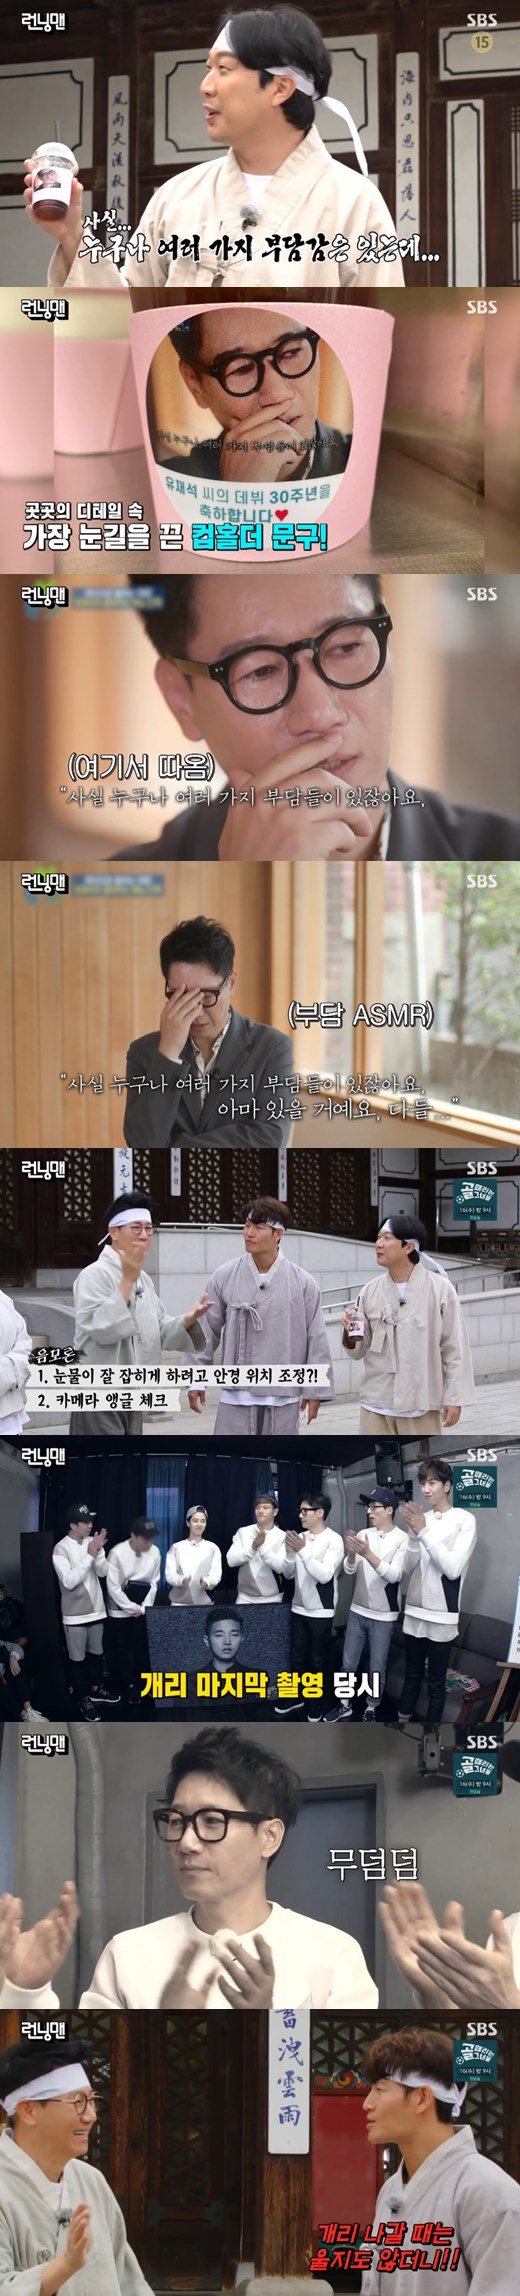 Comedian Ji Suk-jin explains tears shed in You Quiz on the BlockOn the afternoon of the 6th, SBS entertainment program Running Man was drawn with Three seats race.On that day, Haha appeared with a coffee tea drink prepared by the production team, who read the words on the cup holder, saying, In fact, everyone has a lot of burdens...When Ji Suk-jin heard this, he was embarrassed: the phrase was written on a coffee tea drink cup holder prepared by the production team to celebrate the 30th anniversary of Yoo Jae-Suks debut.Previously, Ji Suk-jin appeared on the cable channel tvN Yu Quiz on the Block to celebrate the 30th anniversary of Yoo Jae-Suks debut, leaving a video letter at the request of the production team.In fact, everyone has a lot of burdens, I think there will be, he said.The members of Running Man laughed and laughed, saying, Why do not you take off your glasses? And Why do you look at the camera while crying?Kim Jong-kook shouted, I did not cry when I left Gary, and Ji Suk-jin said, I do not know ....